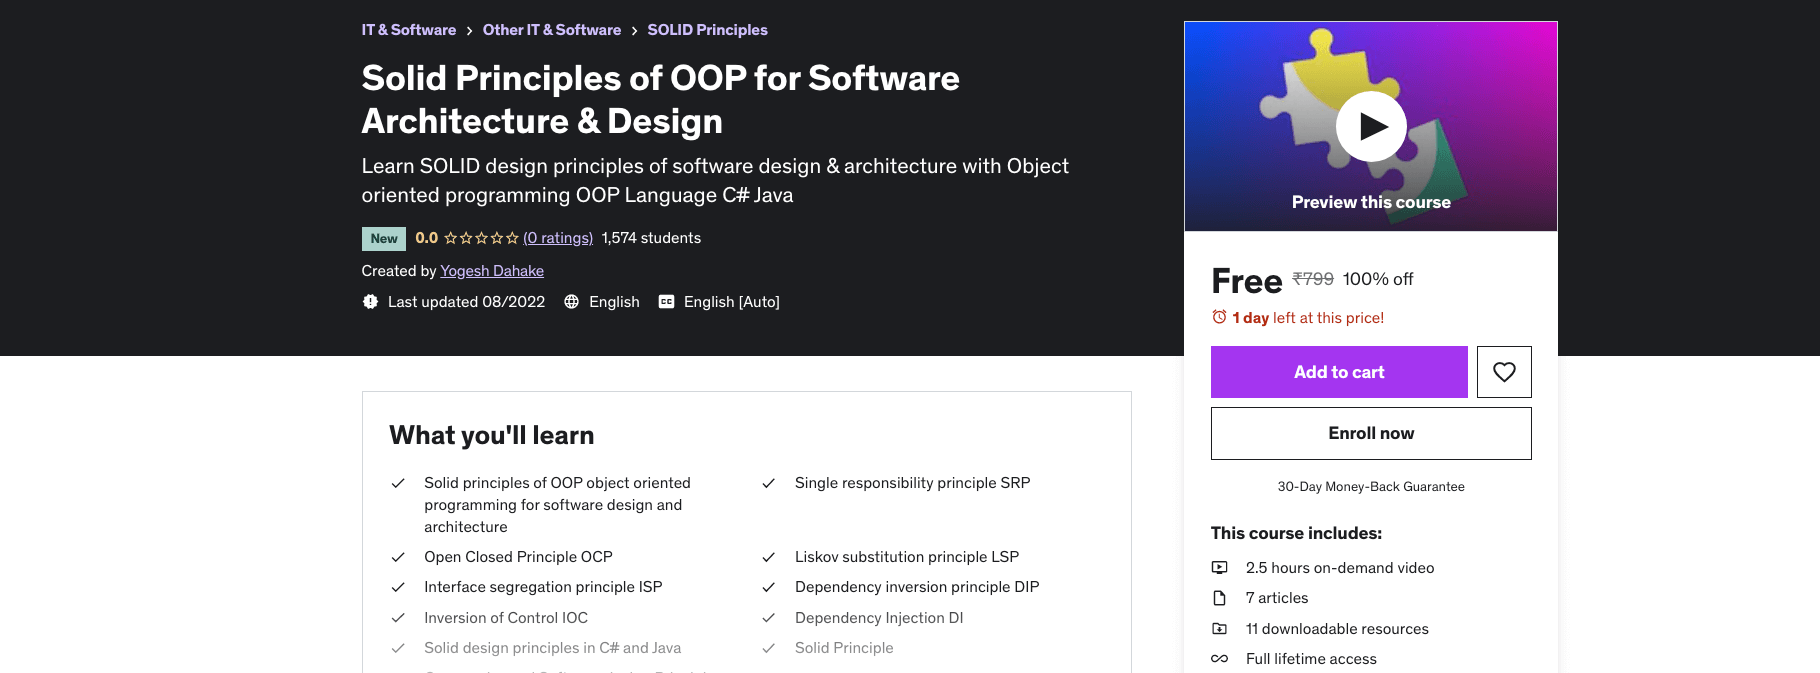 Solid Principles of OOP for Software Architecture & Design